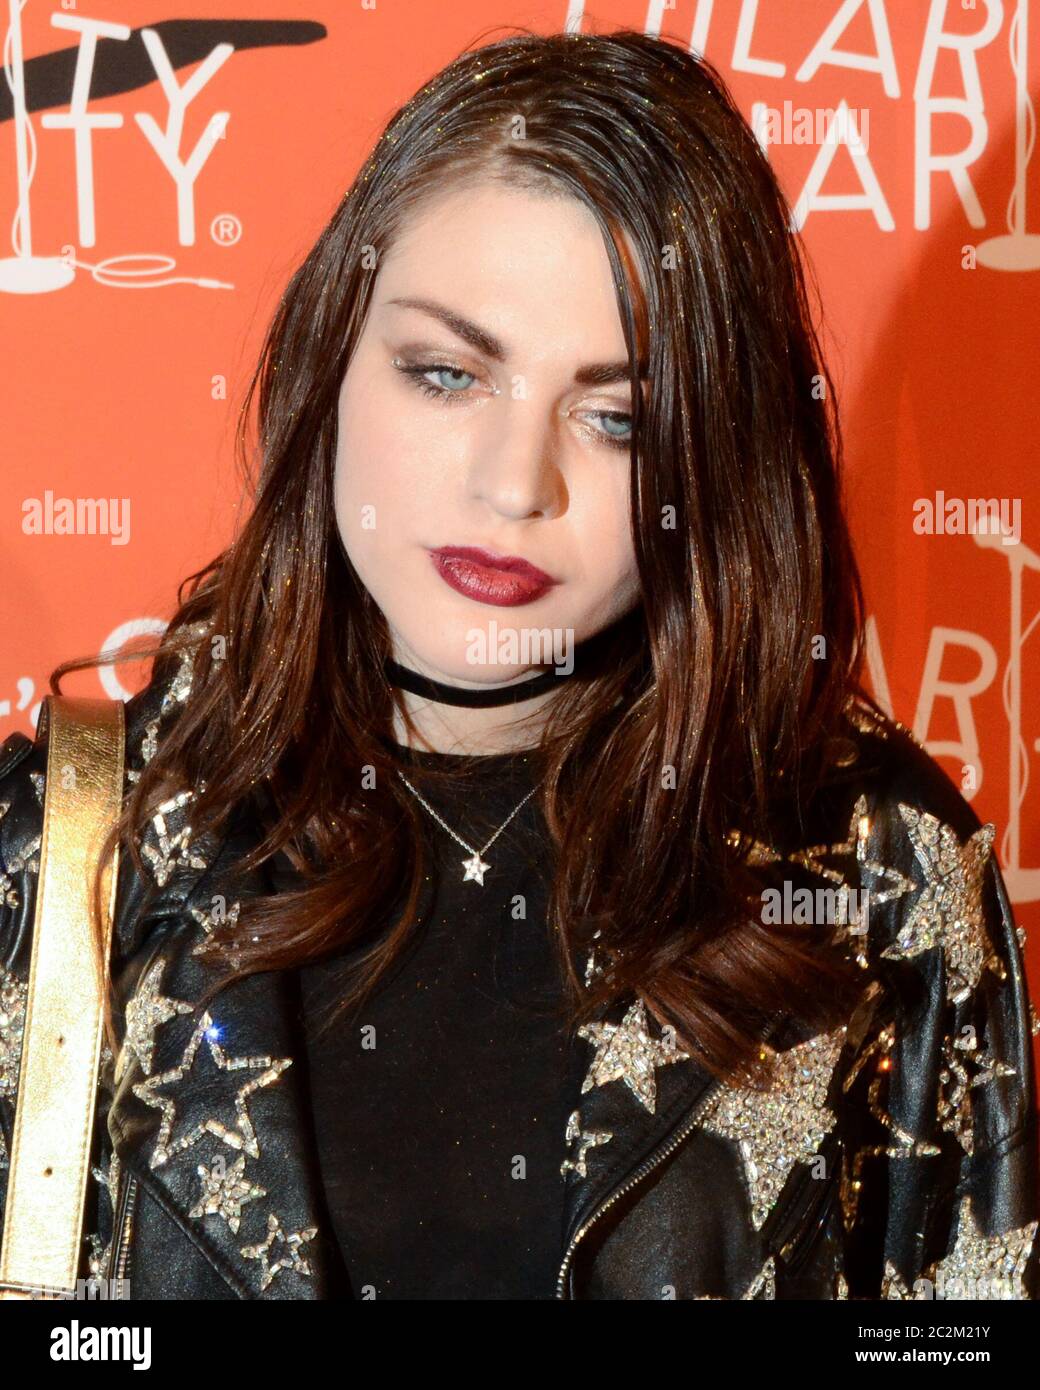 October 15, 2016, Hollywood, California, USA: Frances Bean Cobain attends the Fifth Annual Hilarity For Charity Variety Show. (Credit Image: © Billy Bennight/ZUMA Wire) Stock Photo